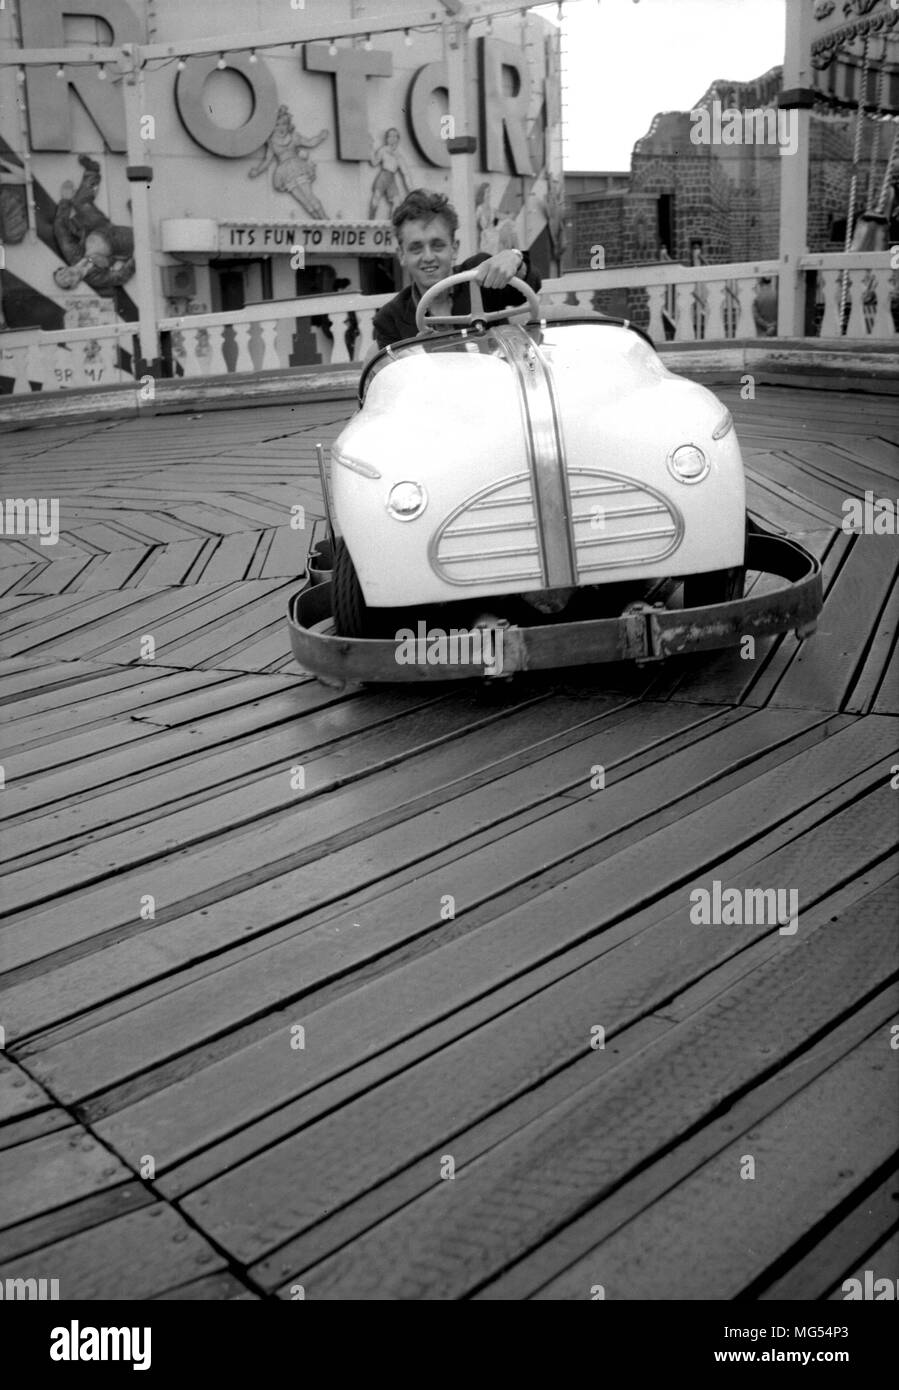 A teenager enjoys a ride on the dodgems at a funfair somewhere in the UK on a cold day in the 1950s Stock Photo